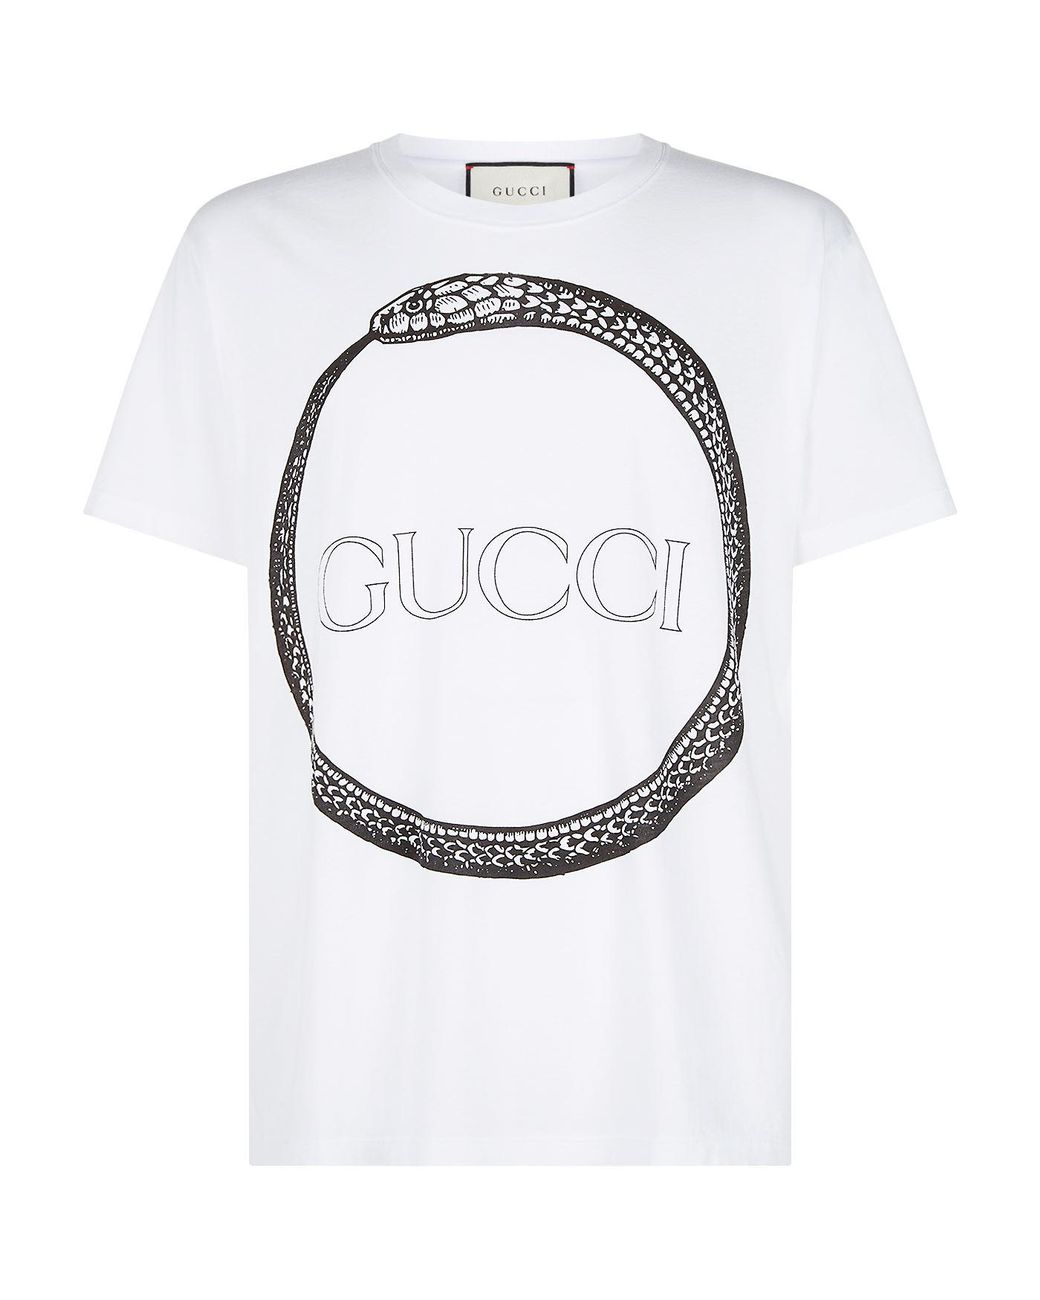 Total 48+ imagen white gucci tee - Giaoduchtn.edu.vn